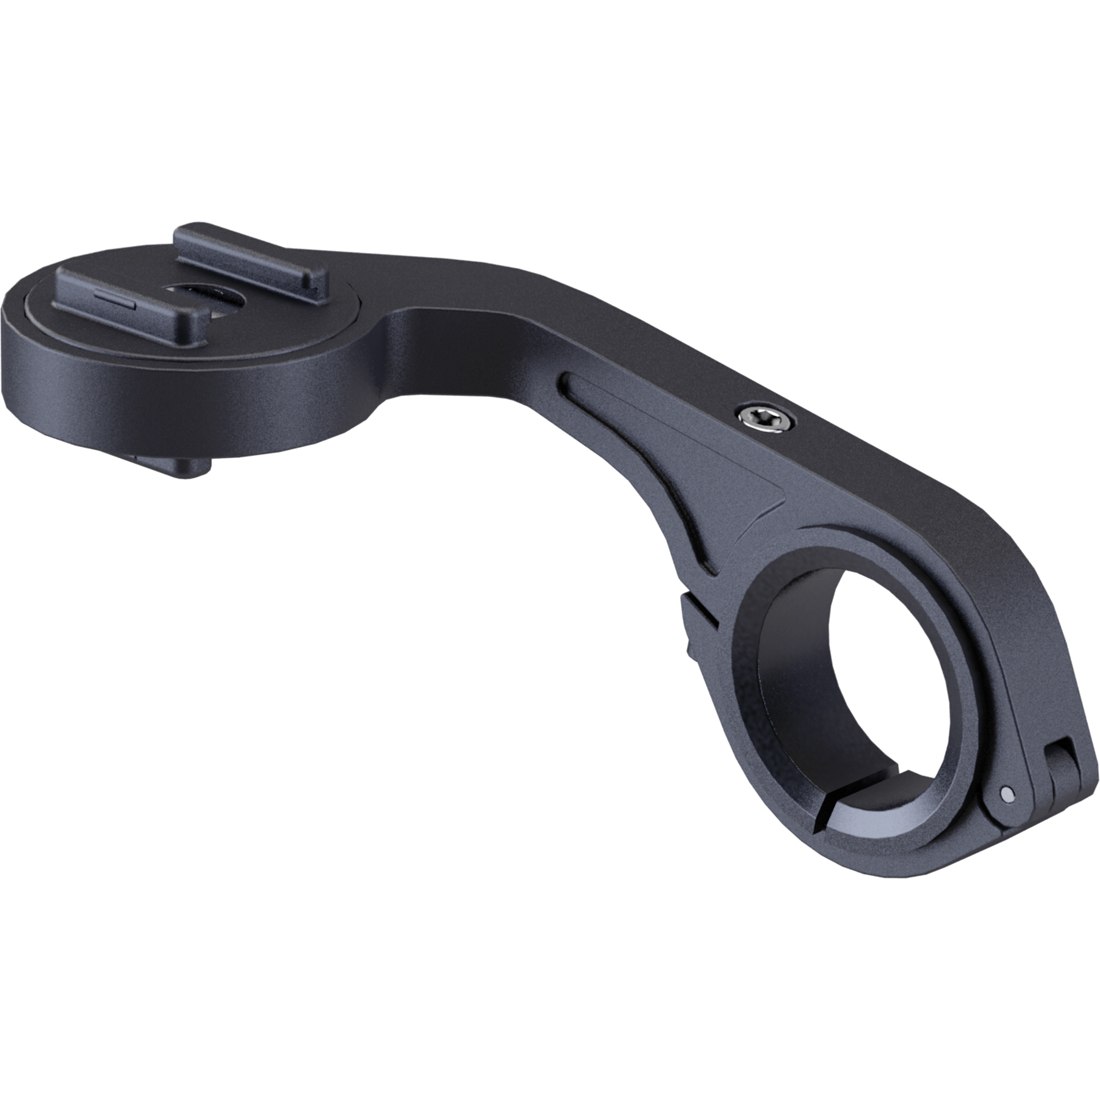 Productfoto van SP CONNECT Handlebar Outfront Mount